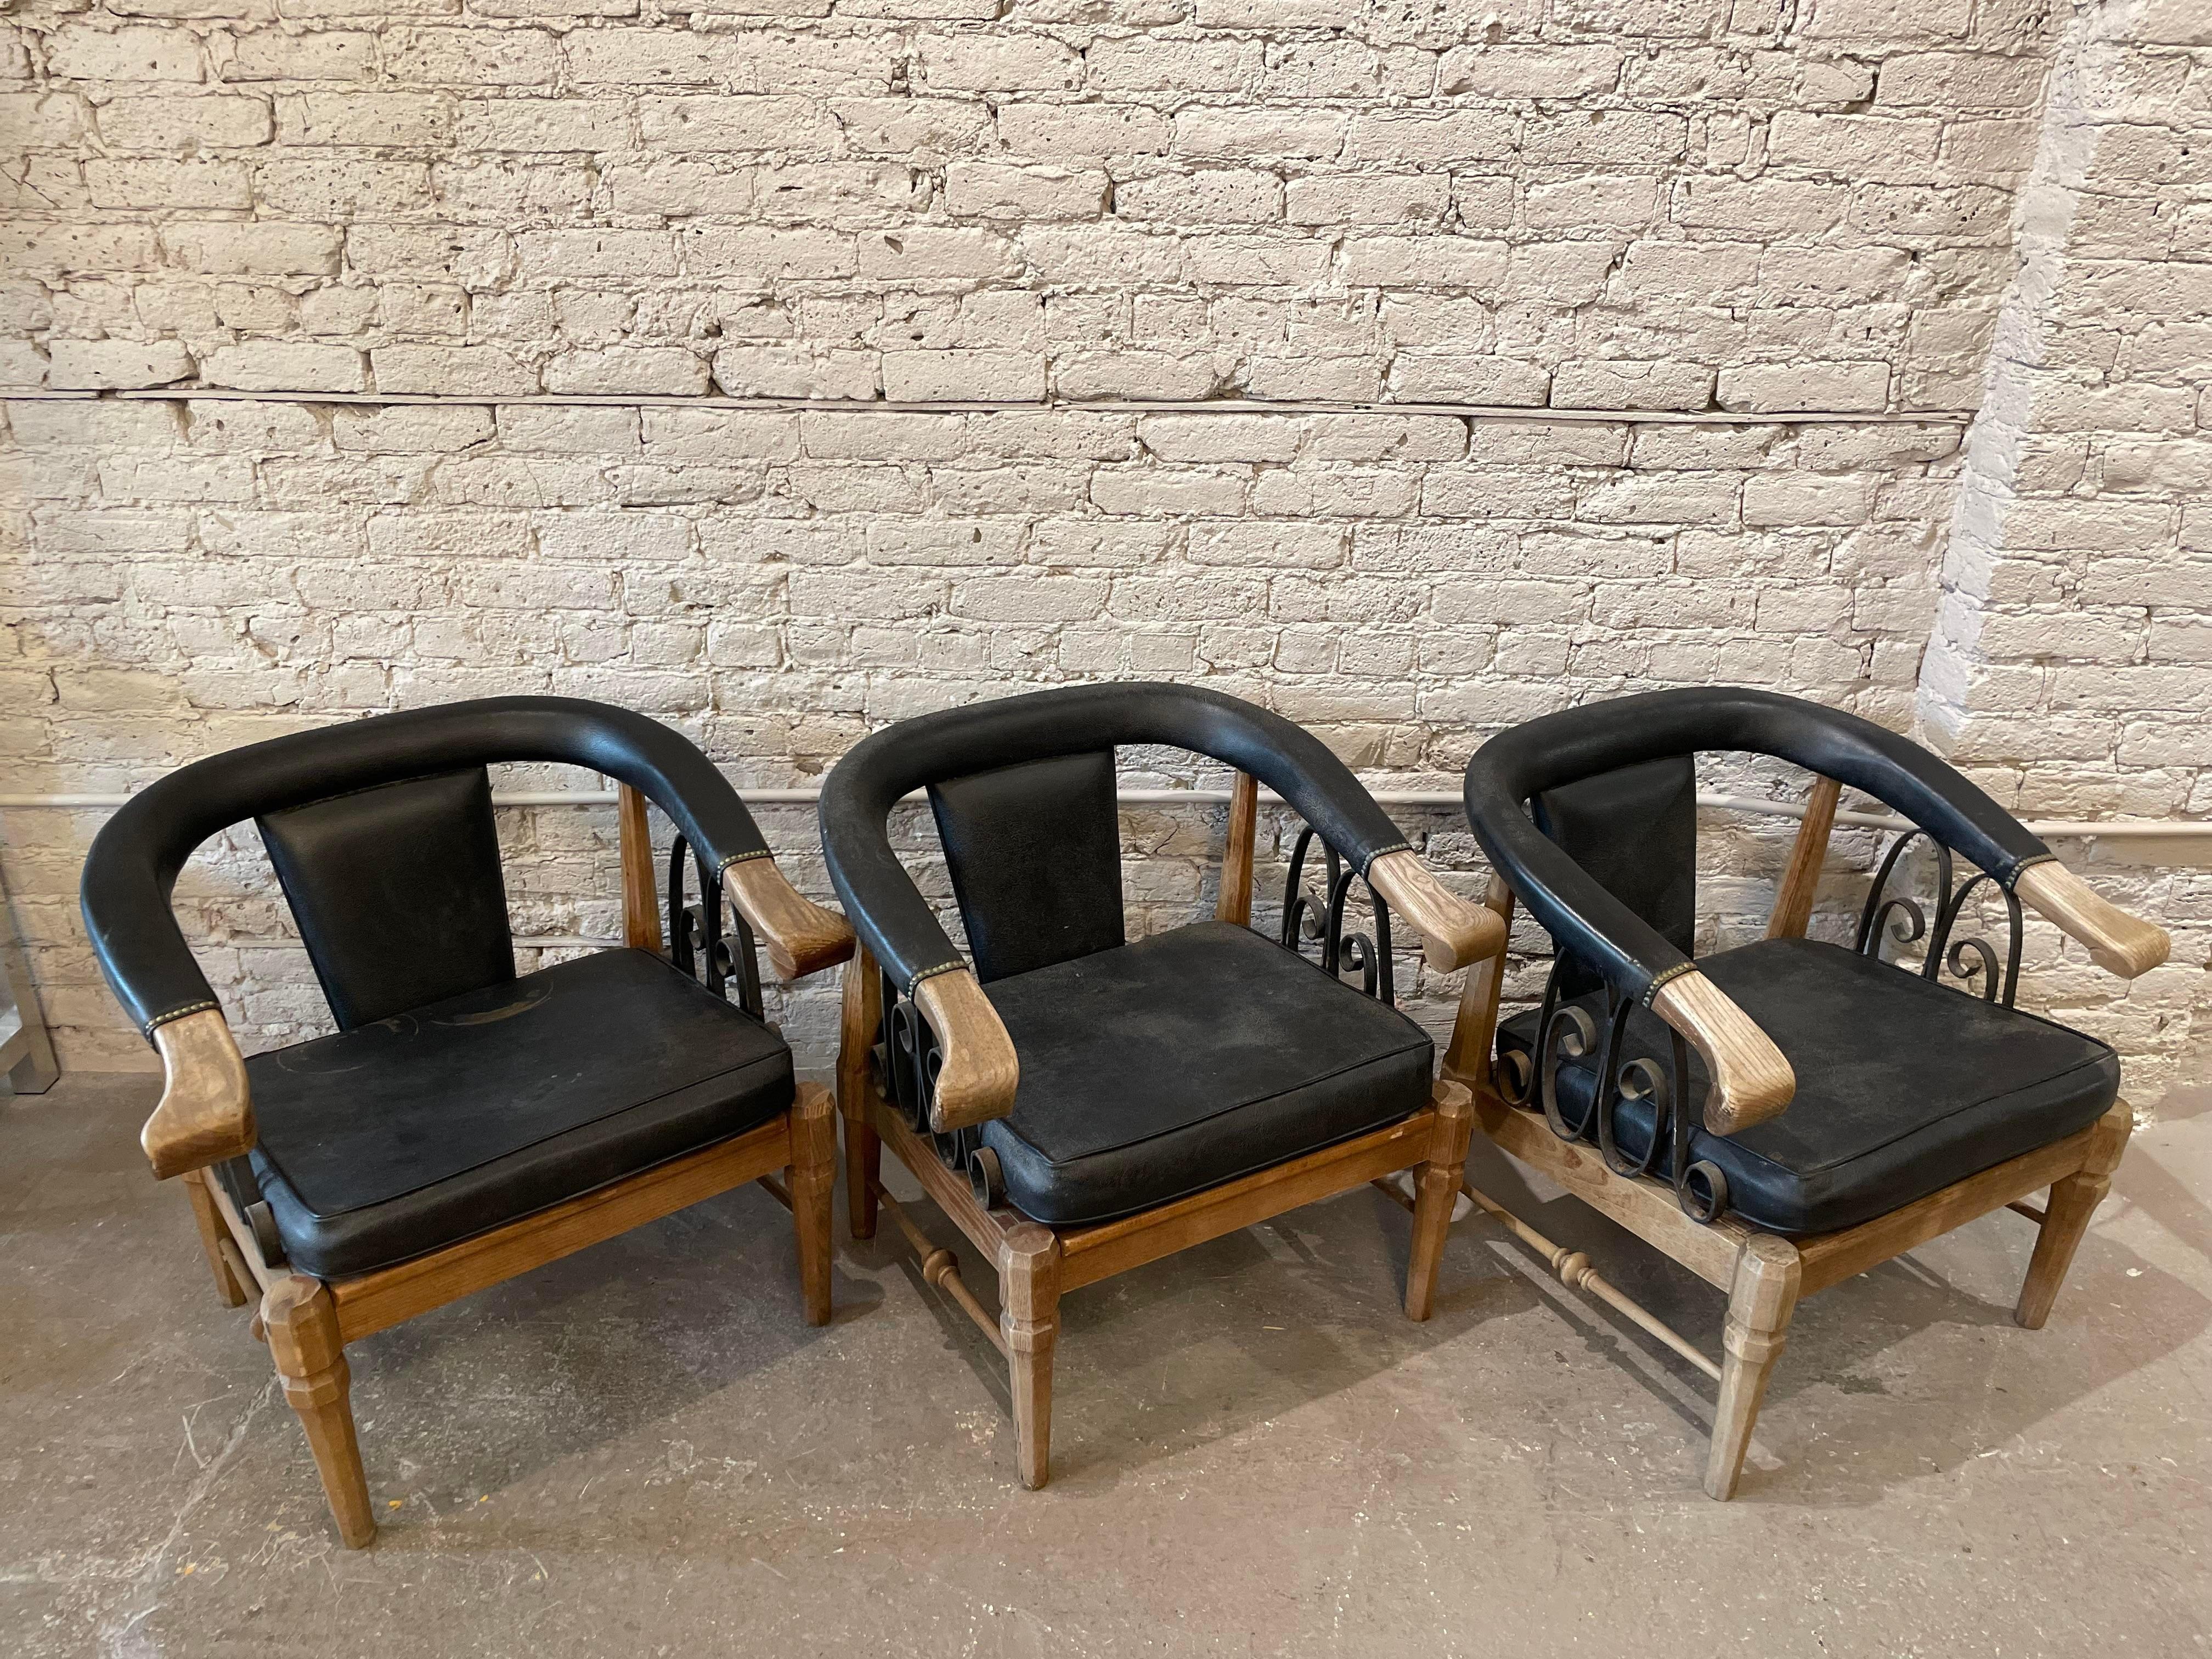 1980s Vintage Horseshoe Chairs - Set of 3 For Sale 2